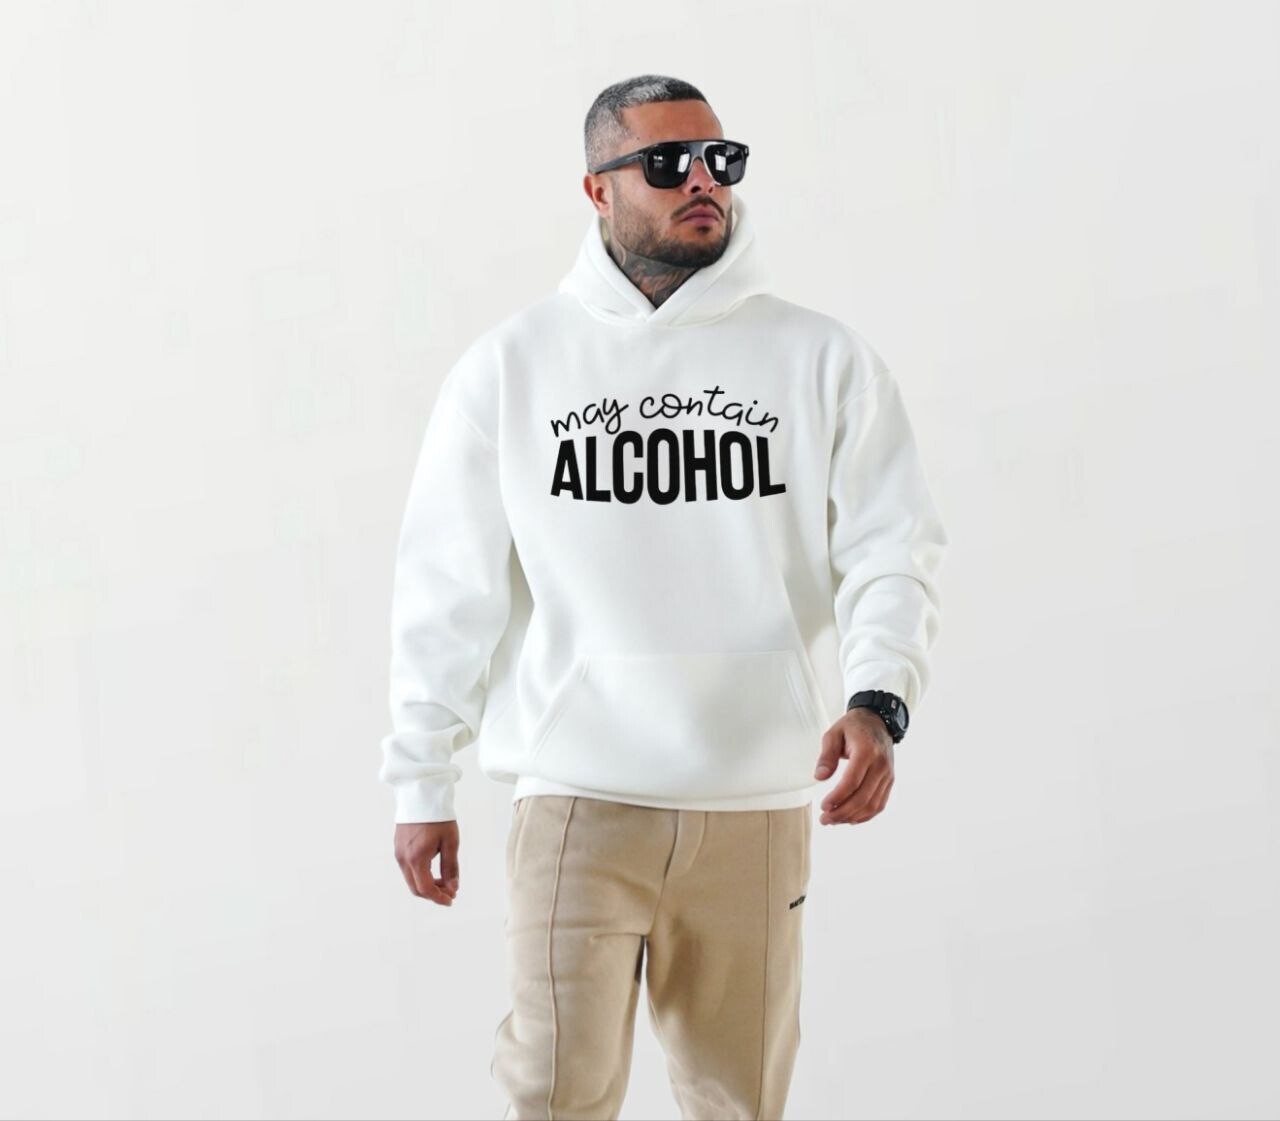 May contain alcohol_Elite Hoodie white